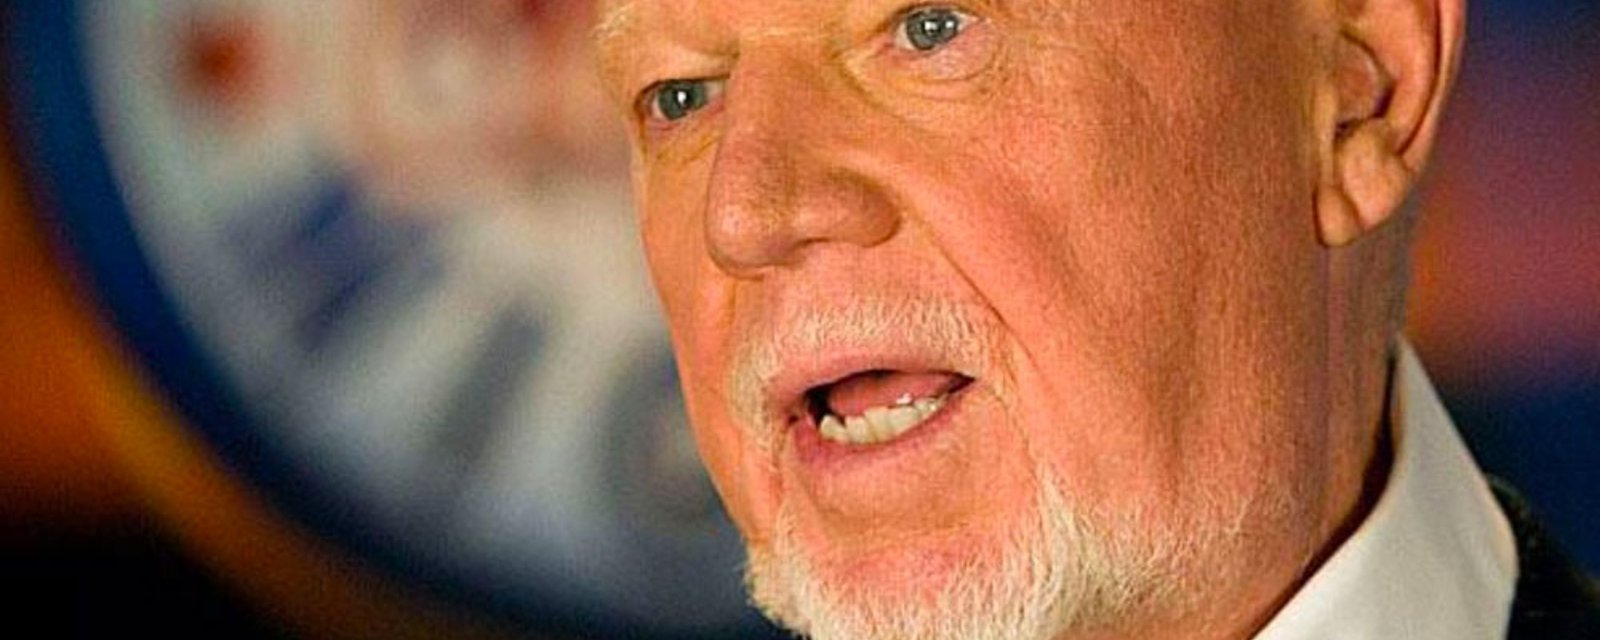 Don Cherry spills the beans on his firing in first episode of new podcast